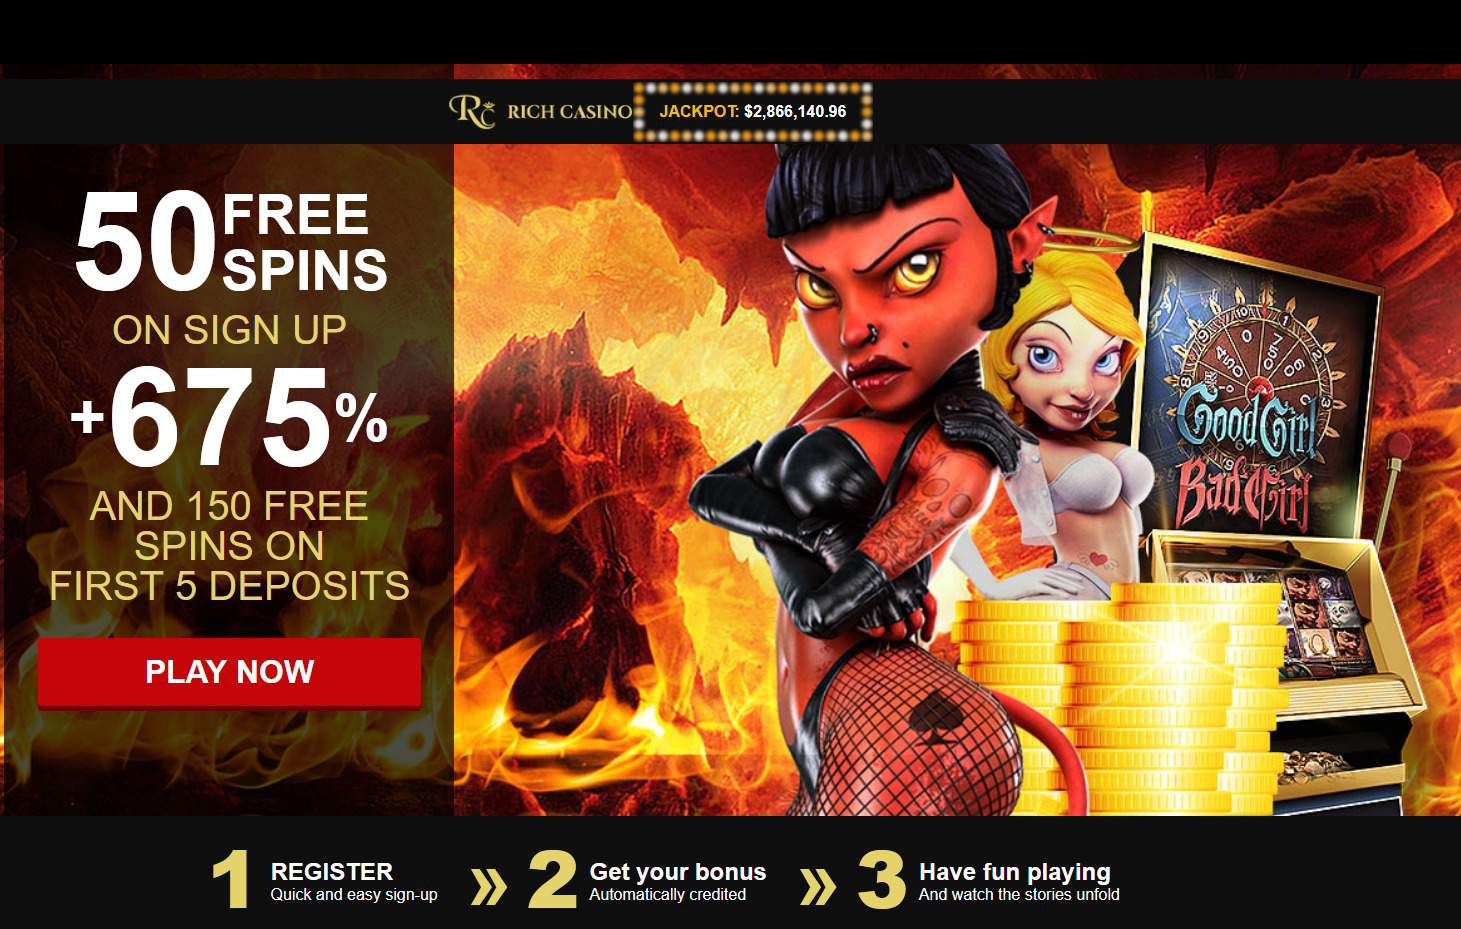 Rich Casino - 50 Free Spins on SUP + 675% and 150 Free Sips